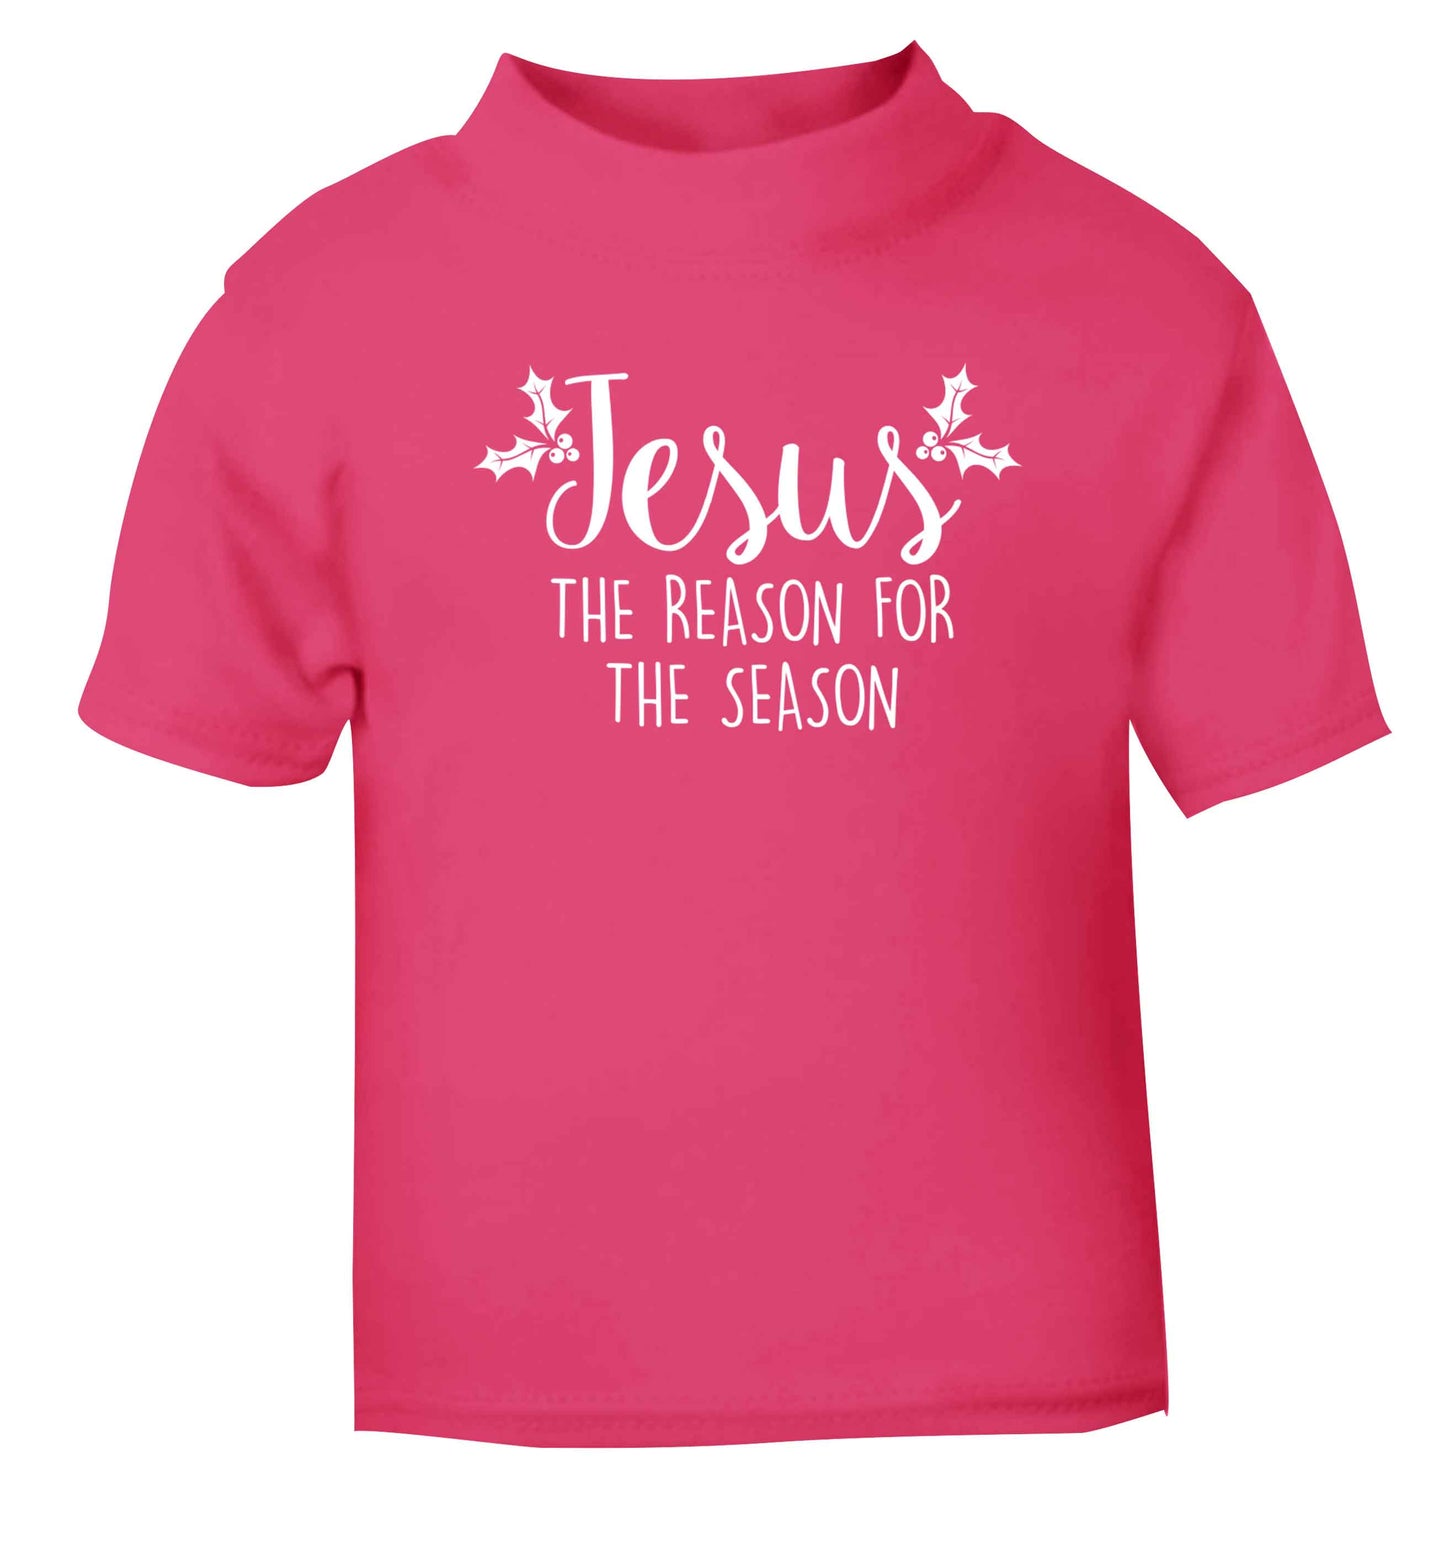 Jesus the reason for the season pink baby toddler Tshirt 2 Years